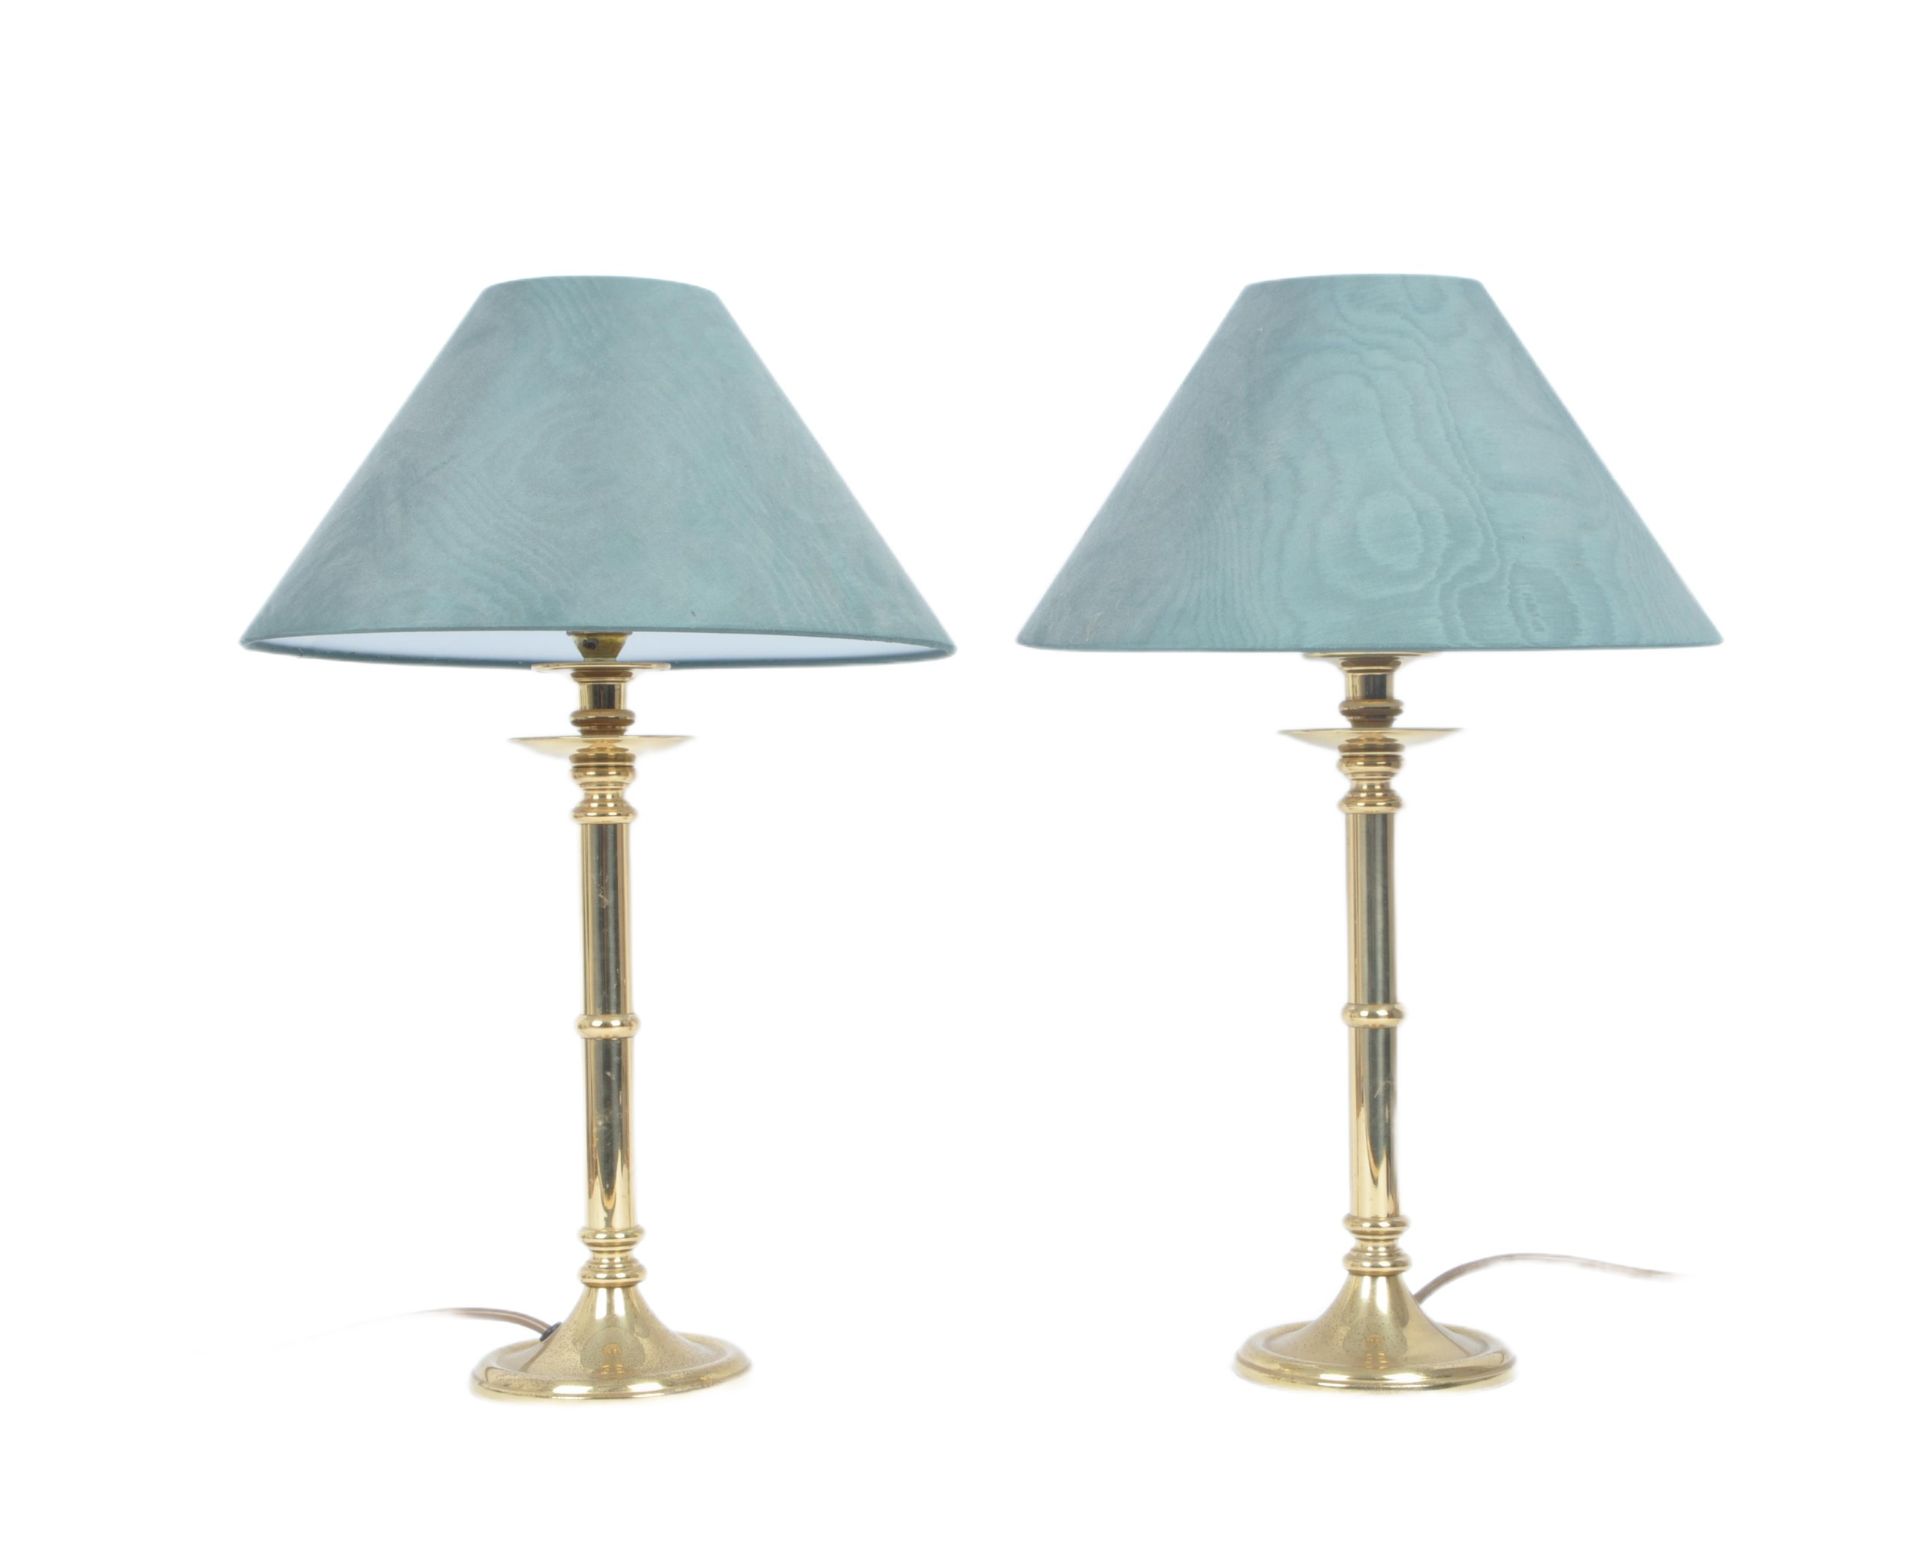 MATCHING PAIR OF1980s TURNED BRASS LAMPS